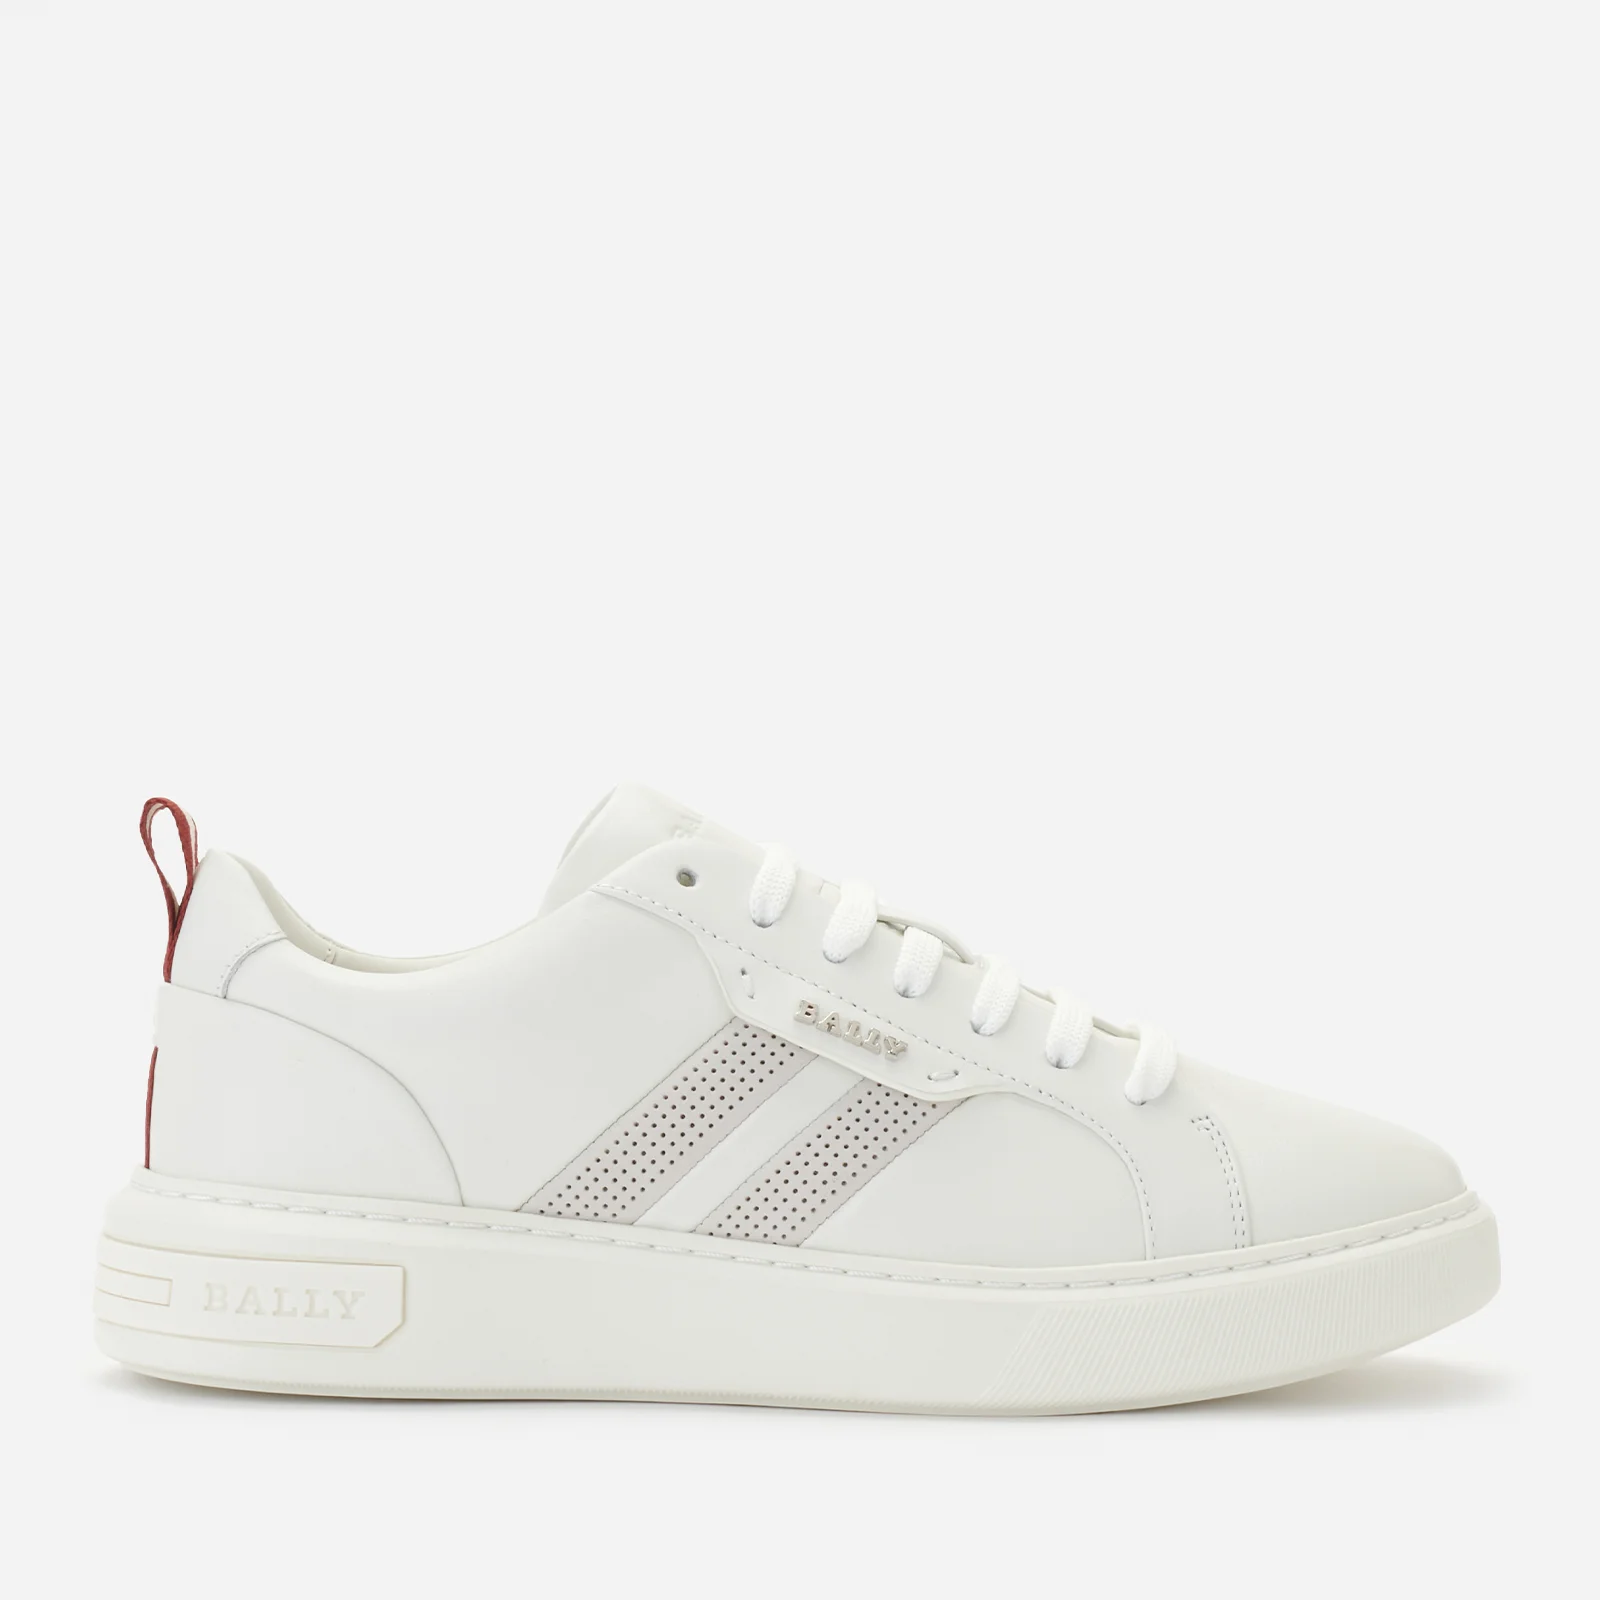 Bally Women's Maxim-W Leather Cupsole Trainers - White Image 1